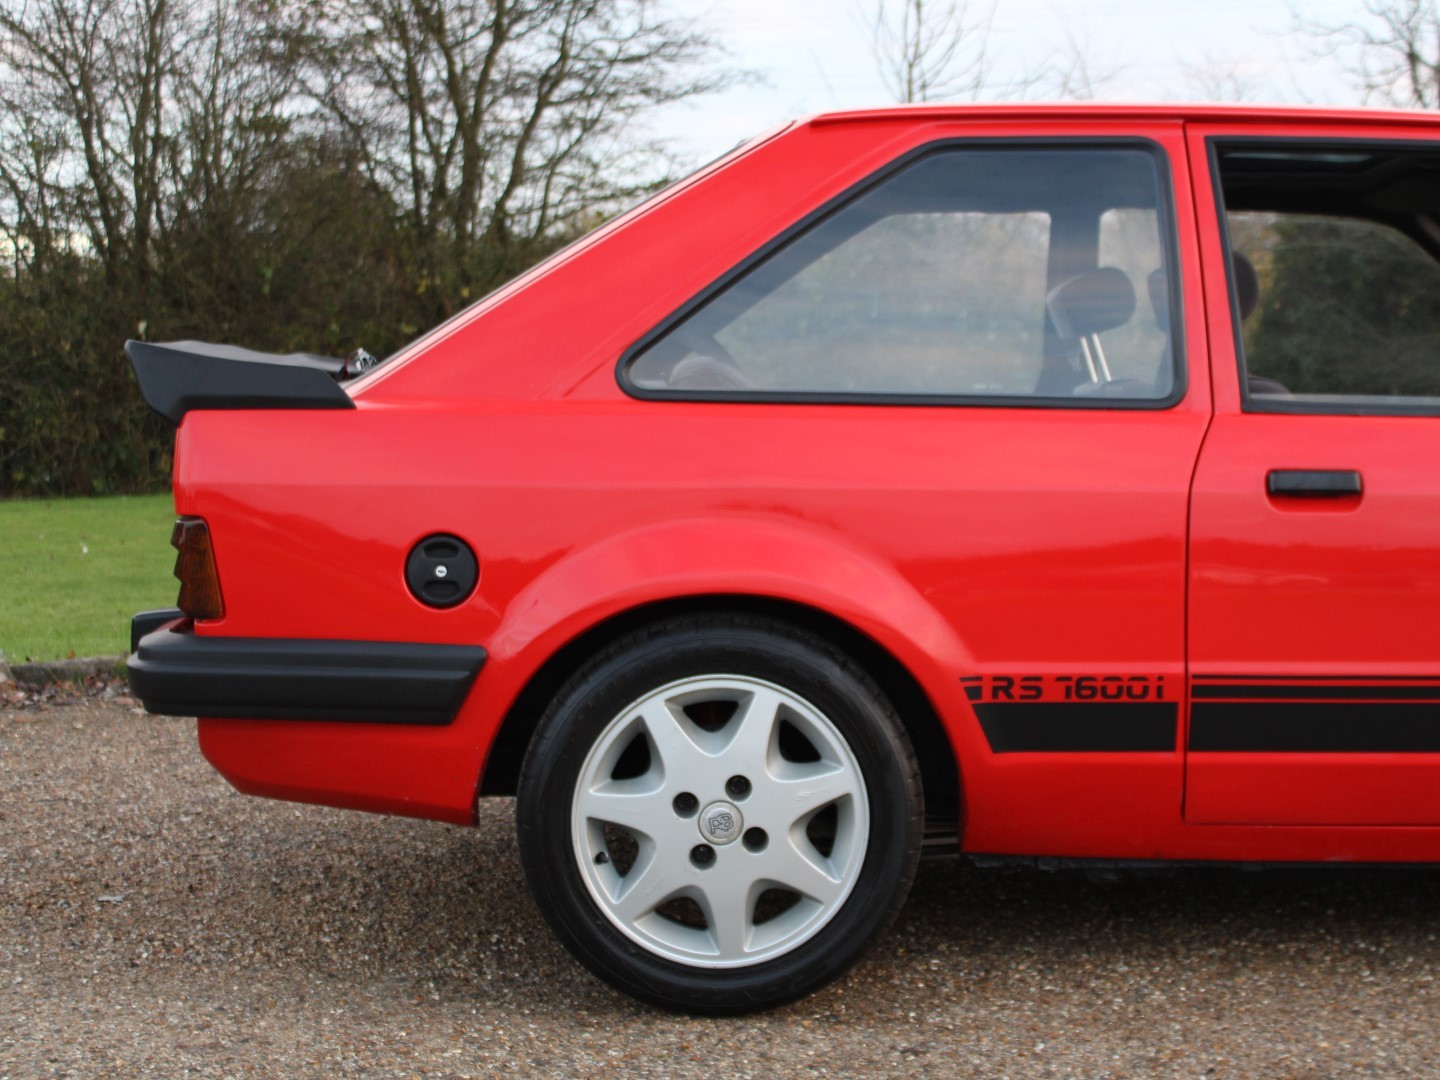 1983 Ford Escort RS 1600i - Image 14 of 24